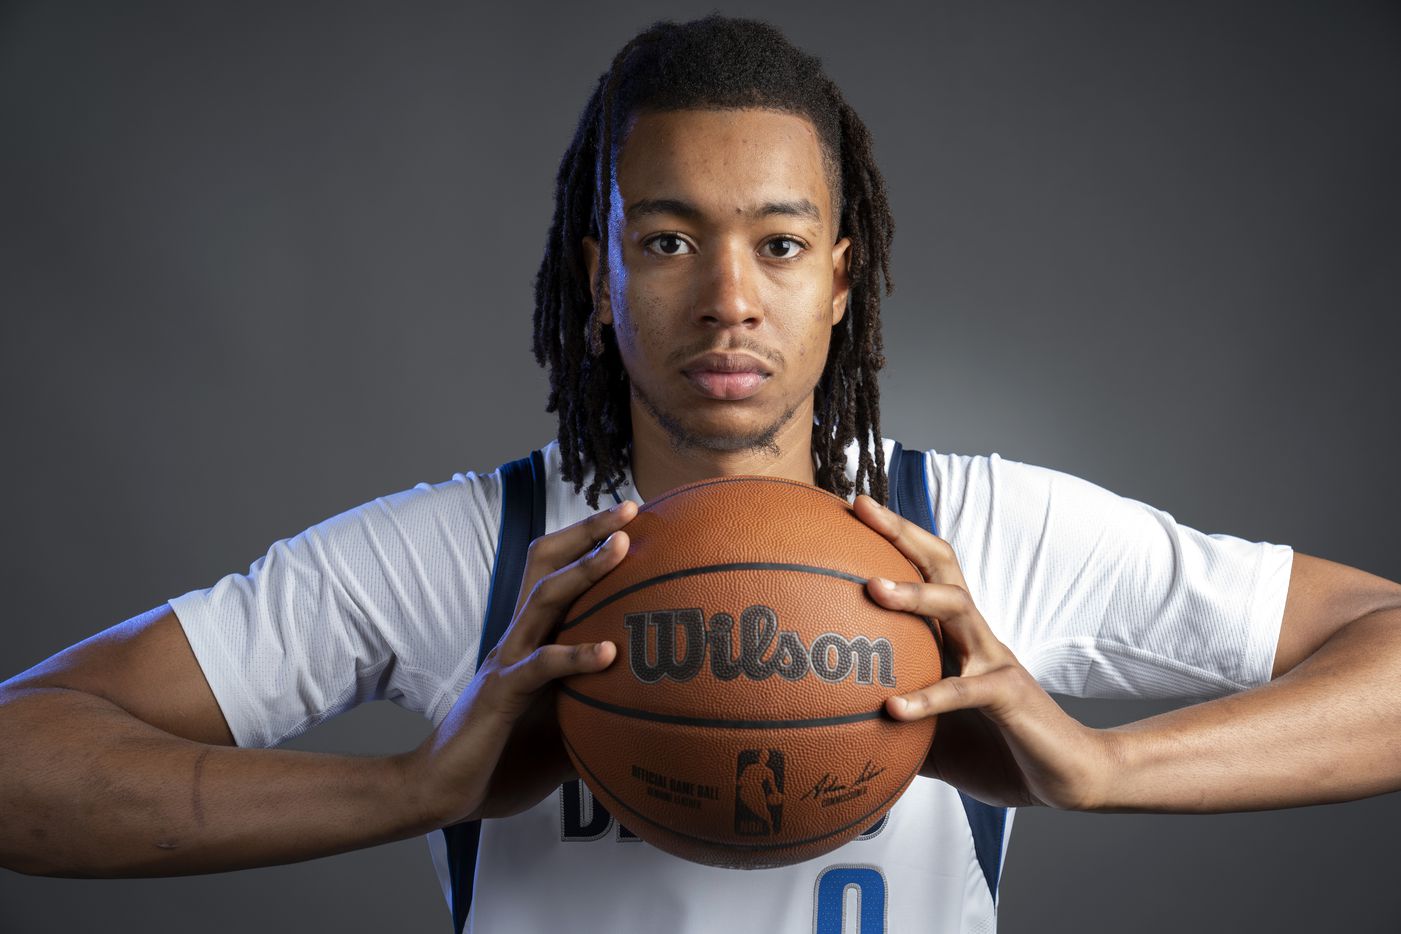 Dallas Mavericks center Moses Brown (9) poses for a portrait during the Dallas Mavericks media day, Monday, September 27, 2021 at American Airlines Center in Dallas. (Jeffrey McWhorter/Special Contributor)